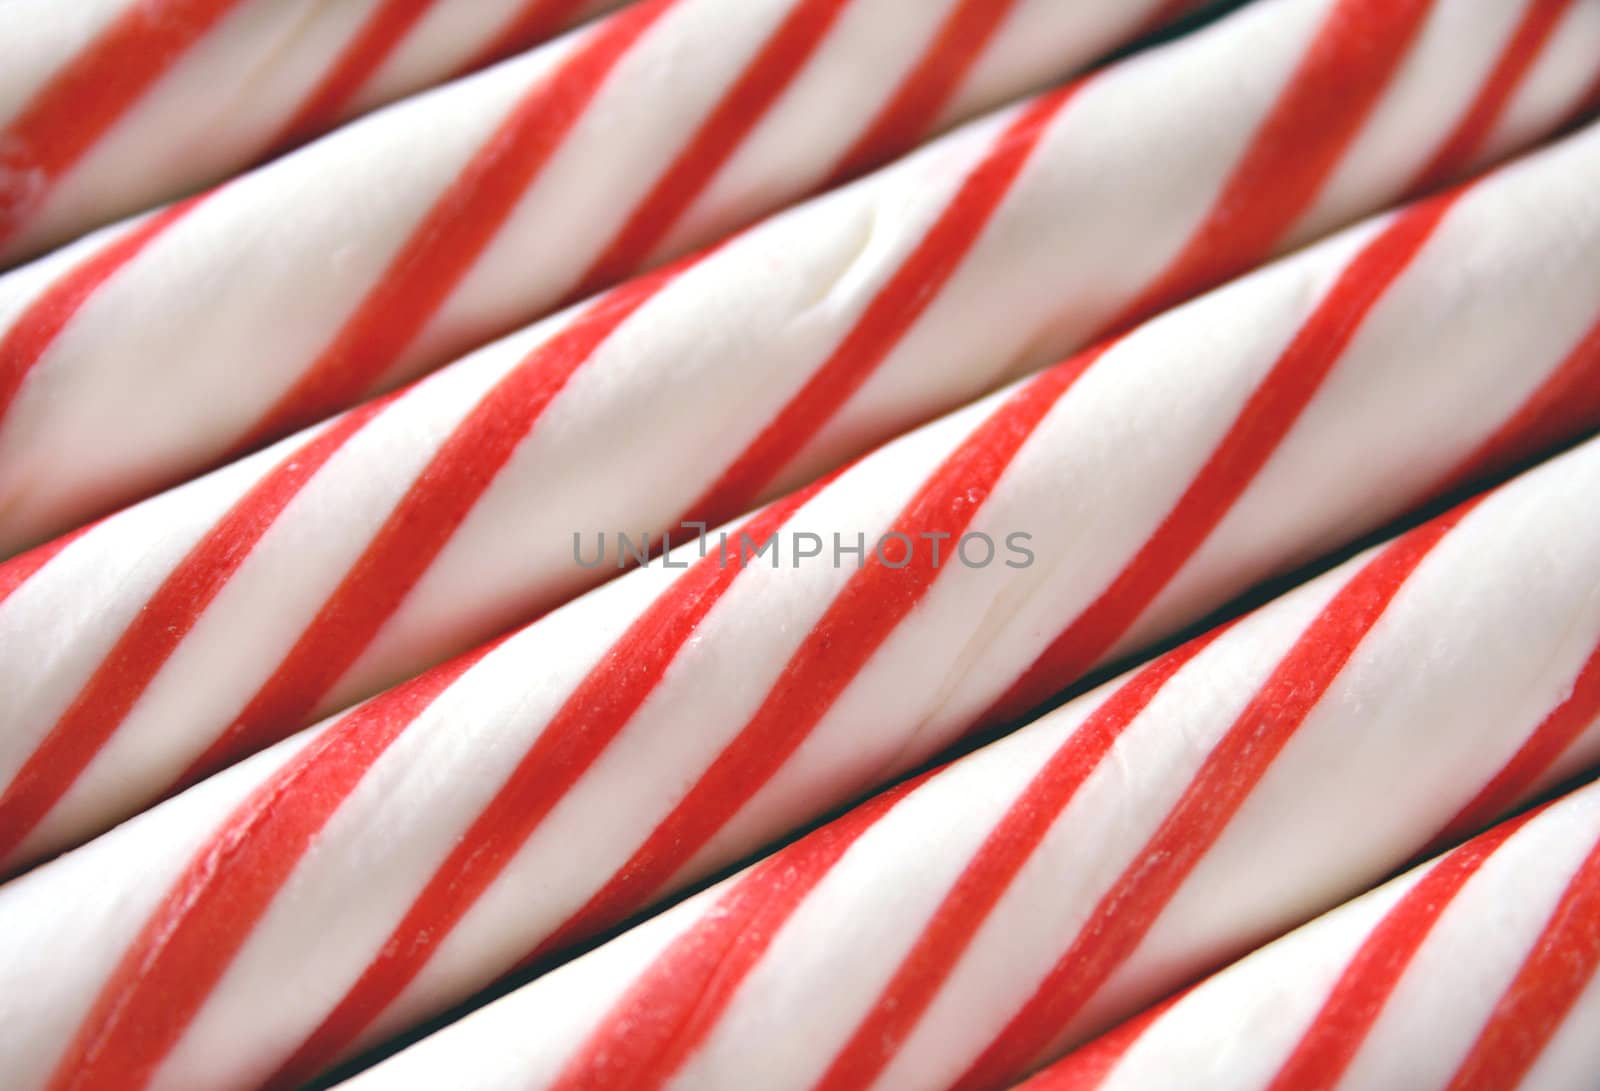 Christmas candy canes lined up

